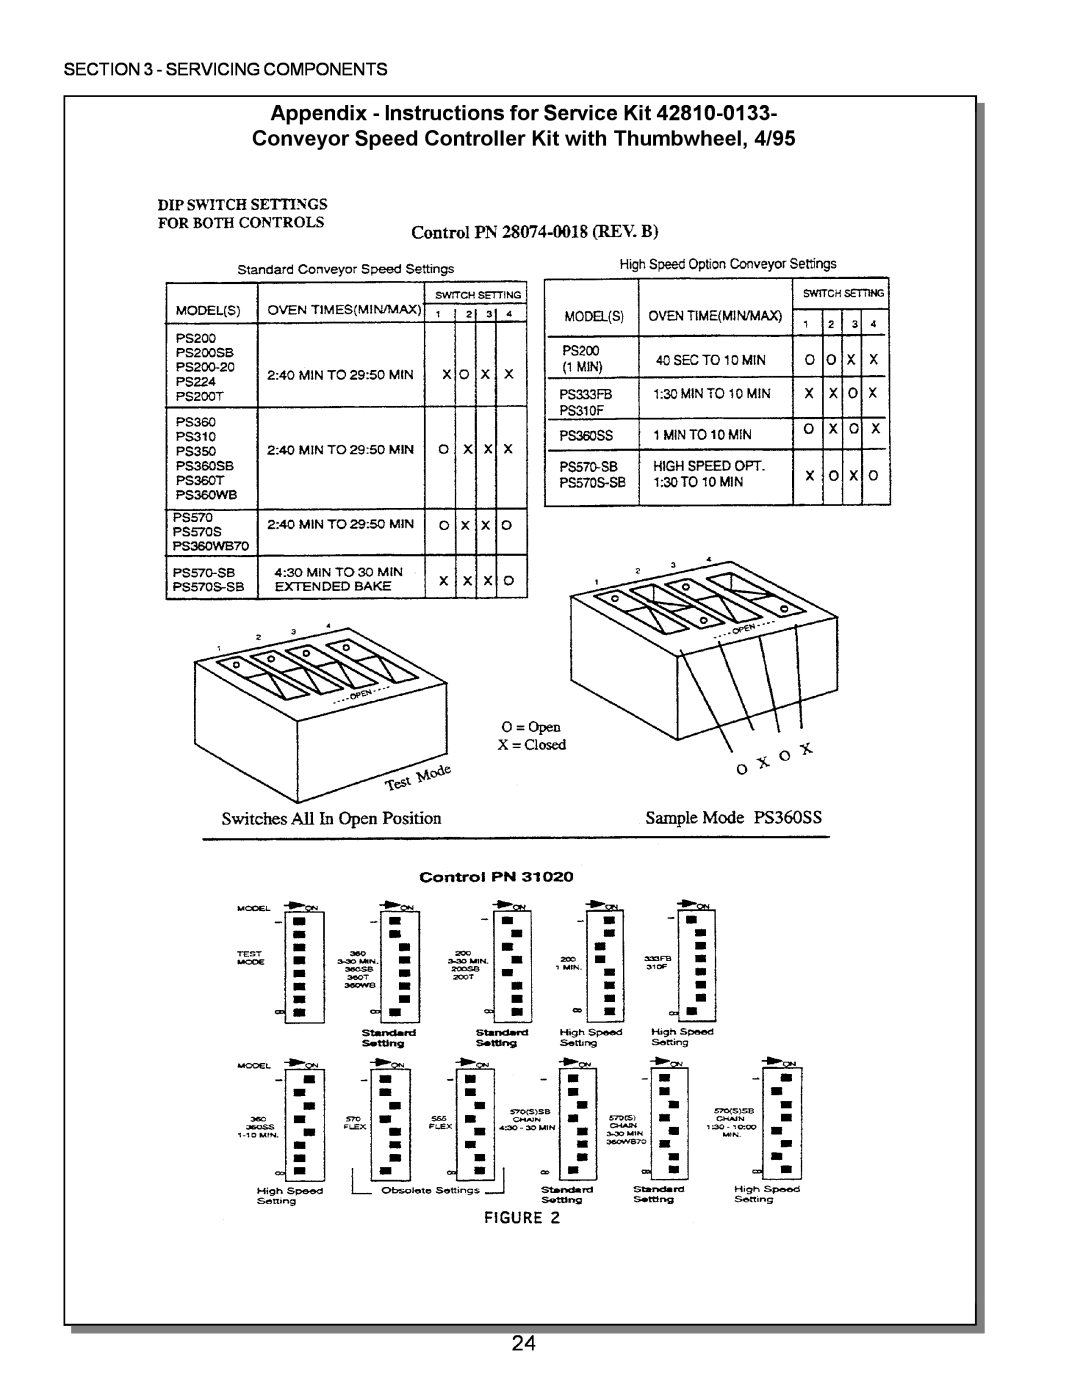 Middleby Marshall PS360 manual Appendix - Instructions for Service Kit, Conveyor Speed Controller Kit with Thumbwheel, 4/95 